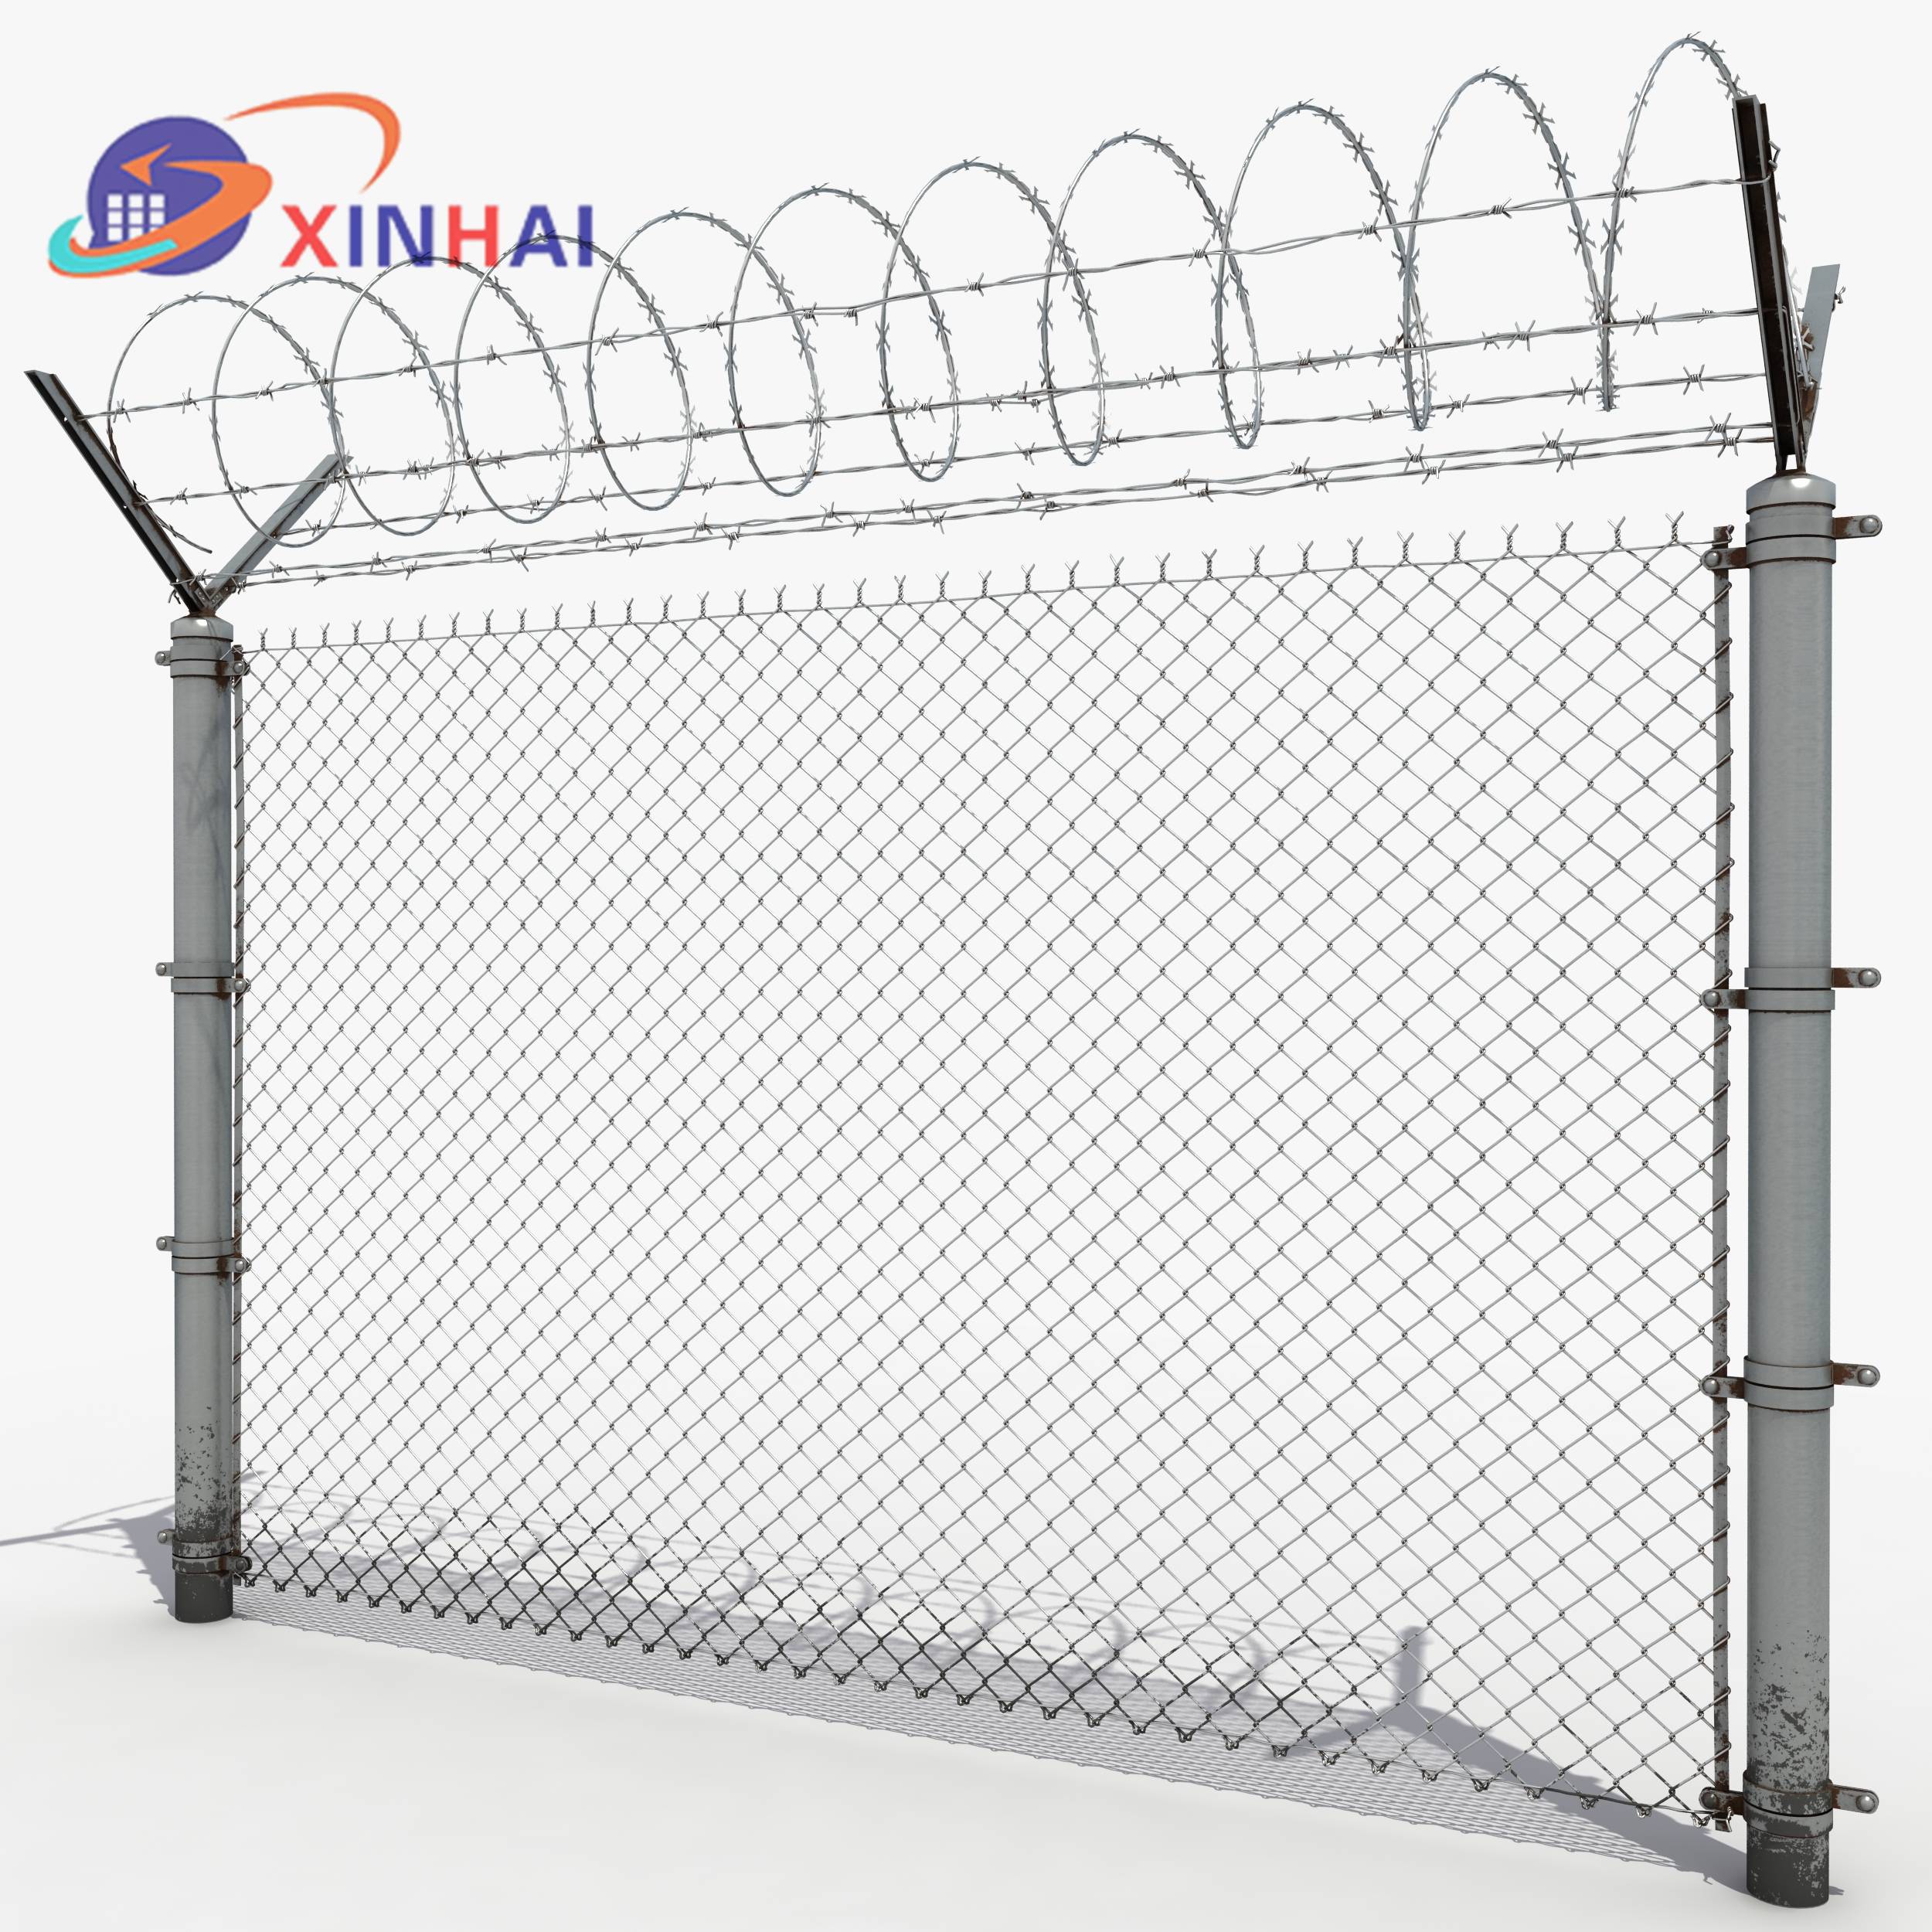 OEM/ODM Supplier Security 358 Fence -
 Airport fence  – Xinhai